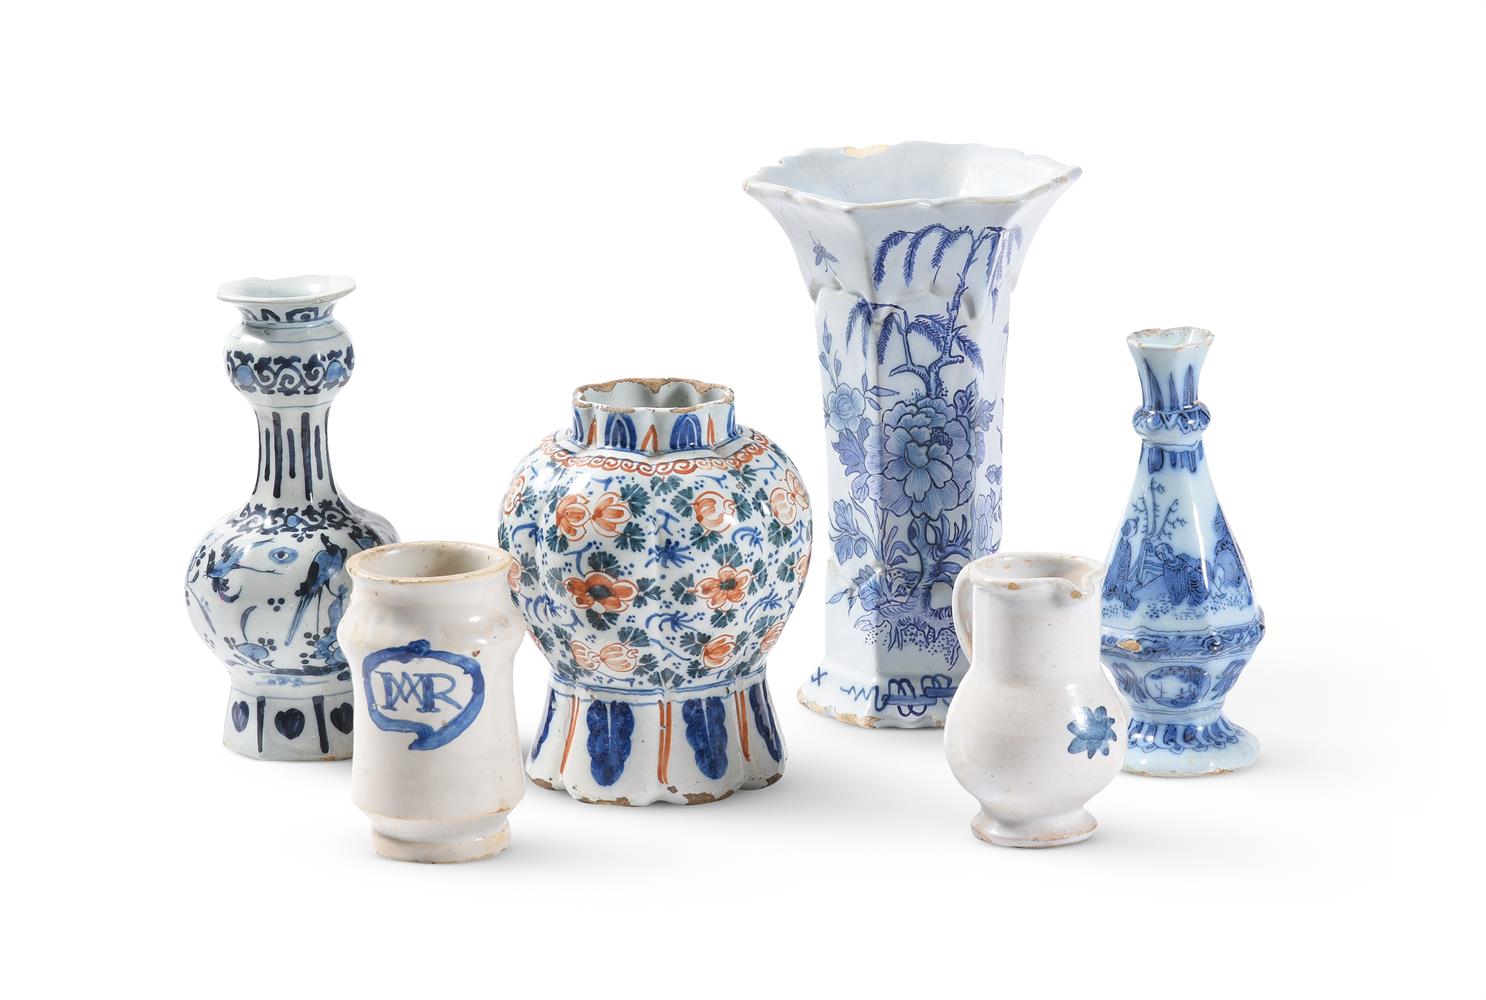 A SELECTION OF TIN-GLAZED EARTHENWARE, 18TH AND 19TH CENTURIES